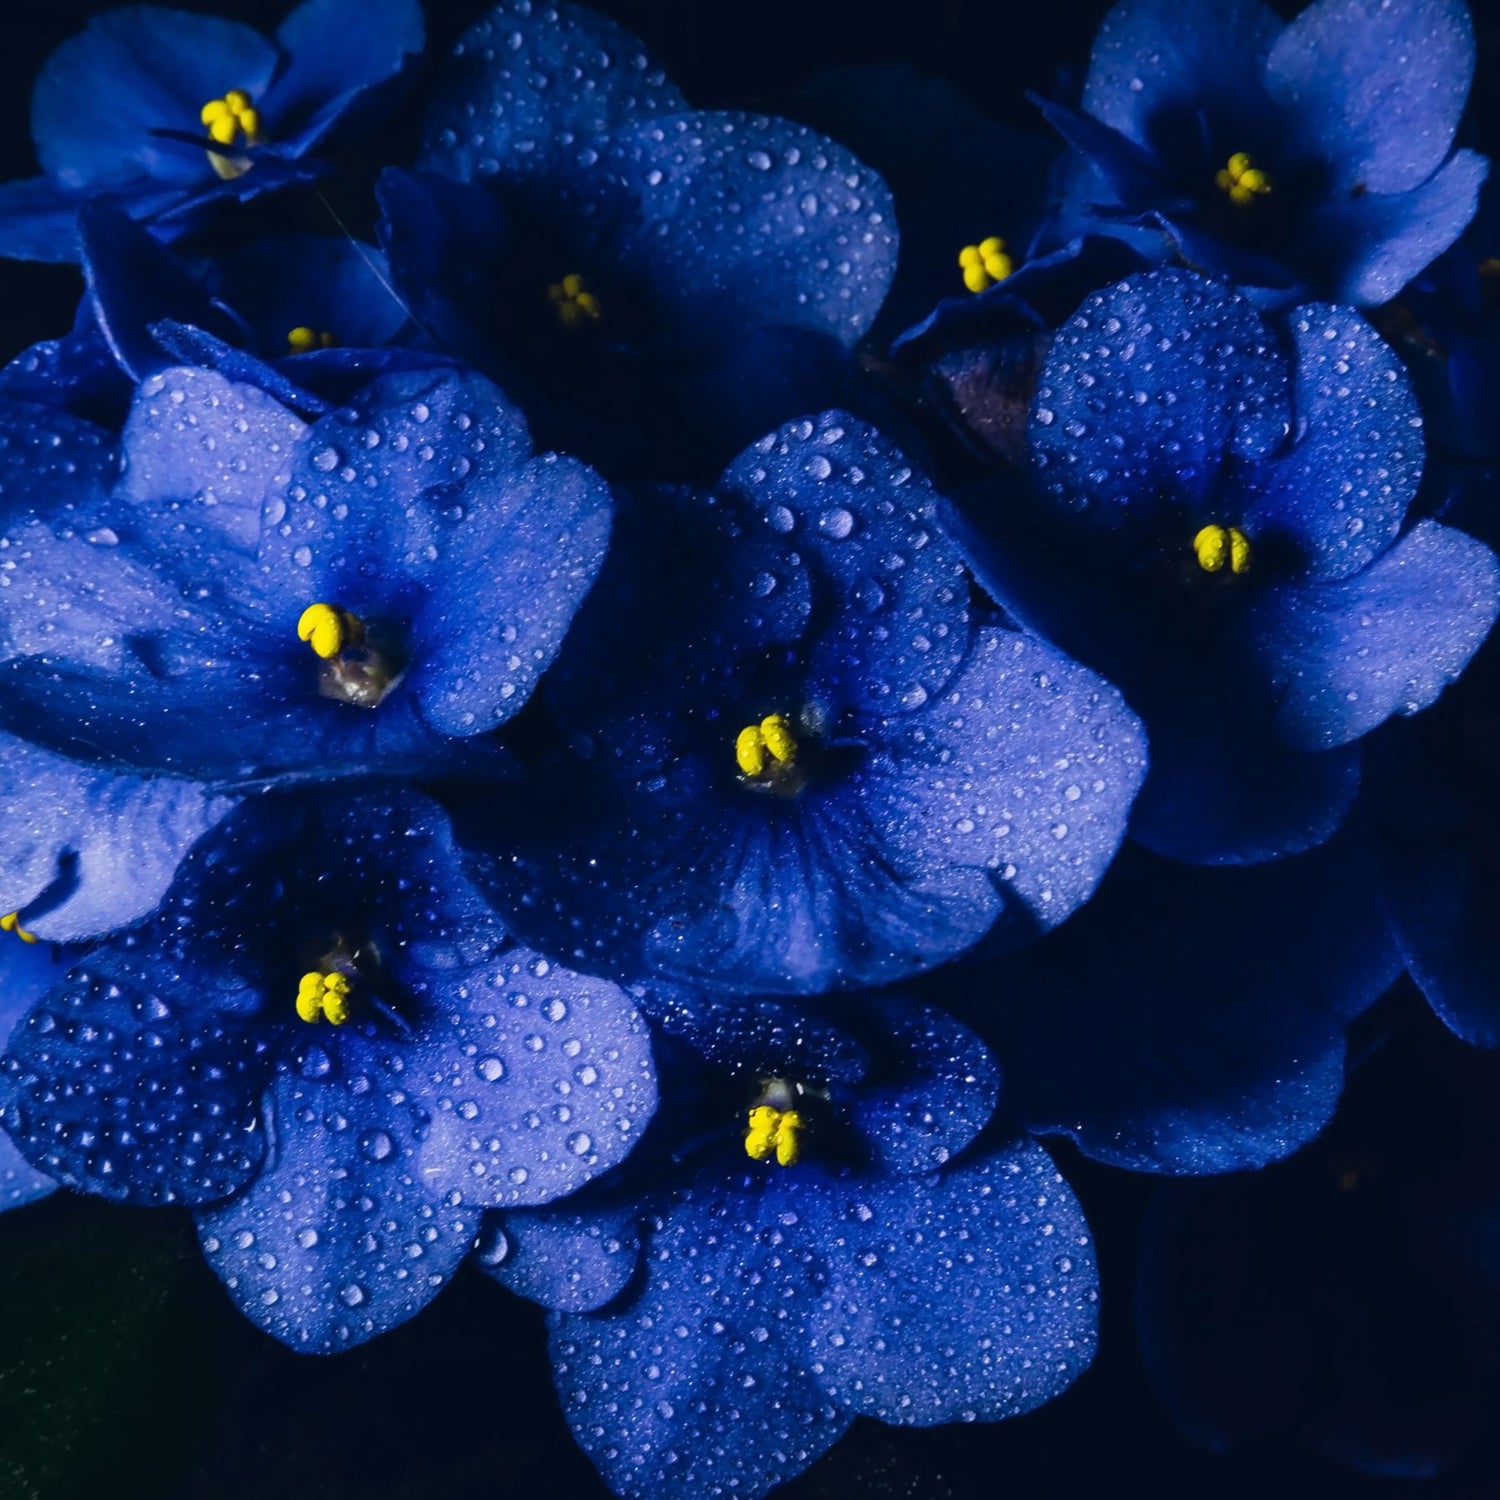 A blue African violet with blustering blooms, featuring water droplets sprinkled on the petals. The front light highlights the contrast between the flowers and the darker background.